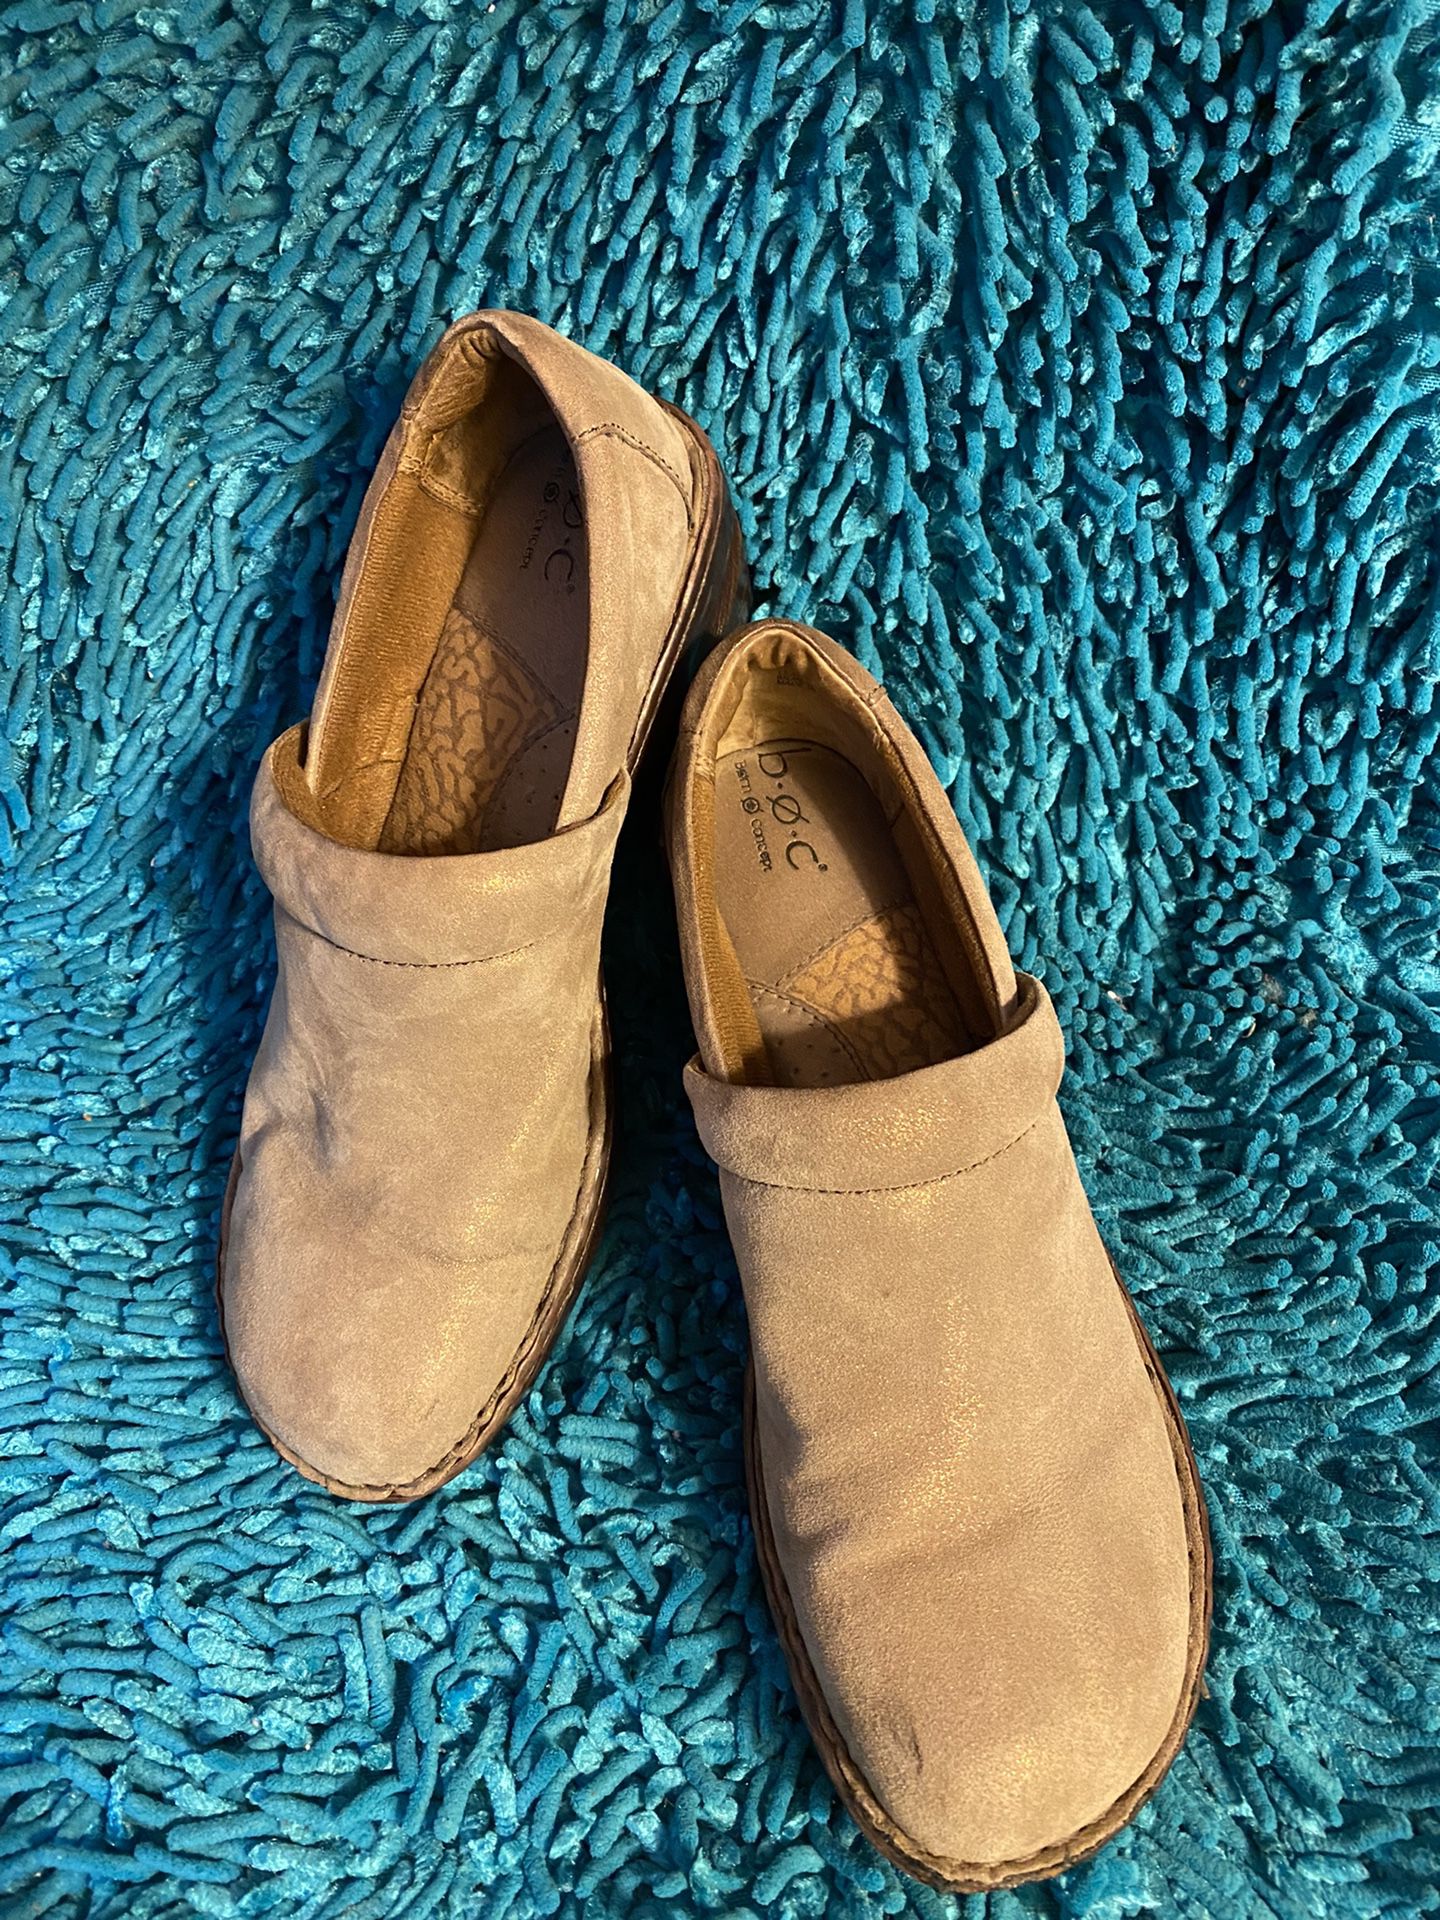 B.O.C. Golden Clogs. Extreme Comfort. Gently Worn. Size 10